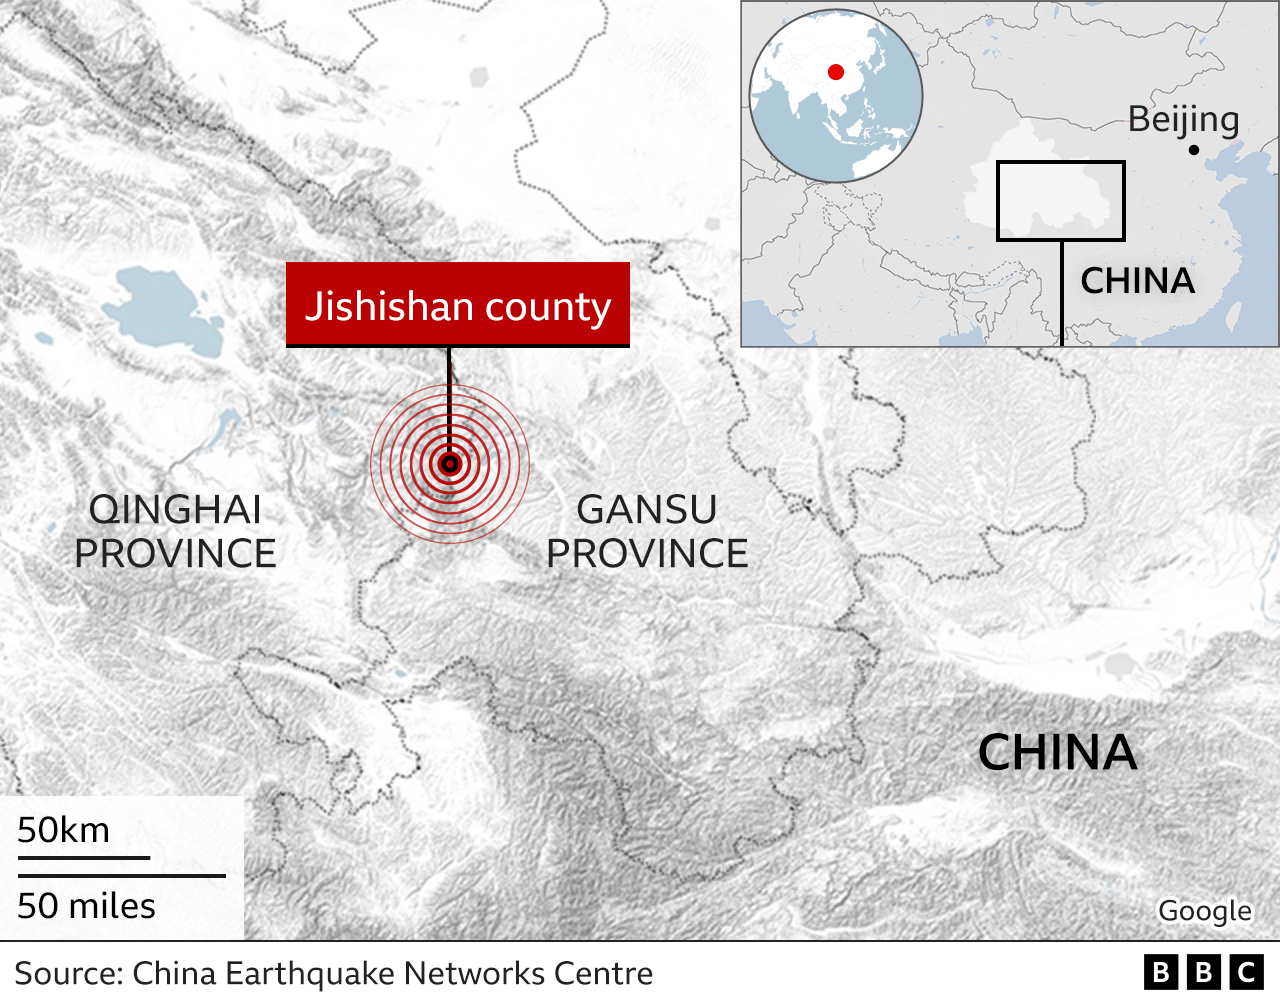 Map showing the epicentre of the earthquake in Jishishan county, Gansu province, north-west China.